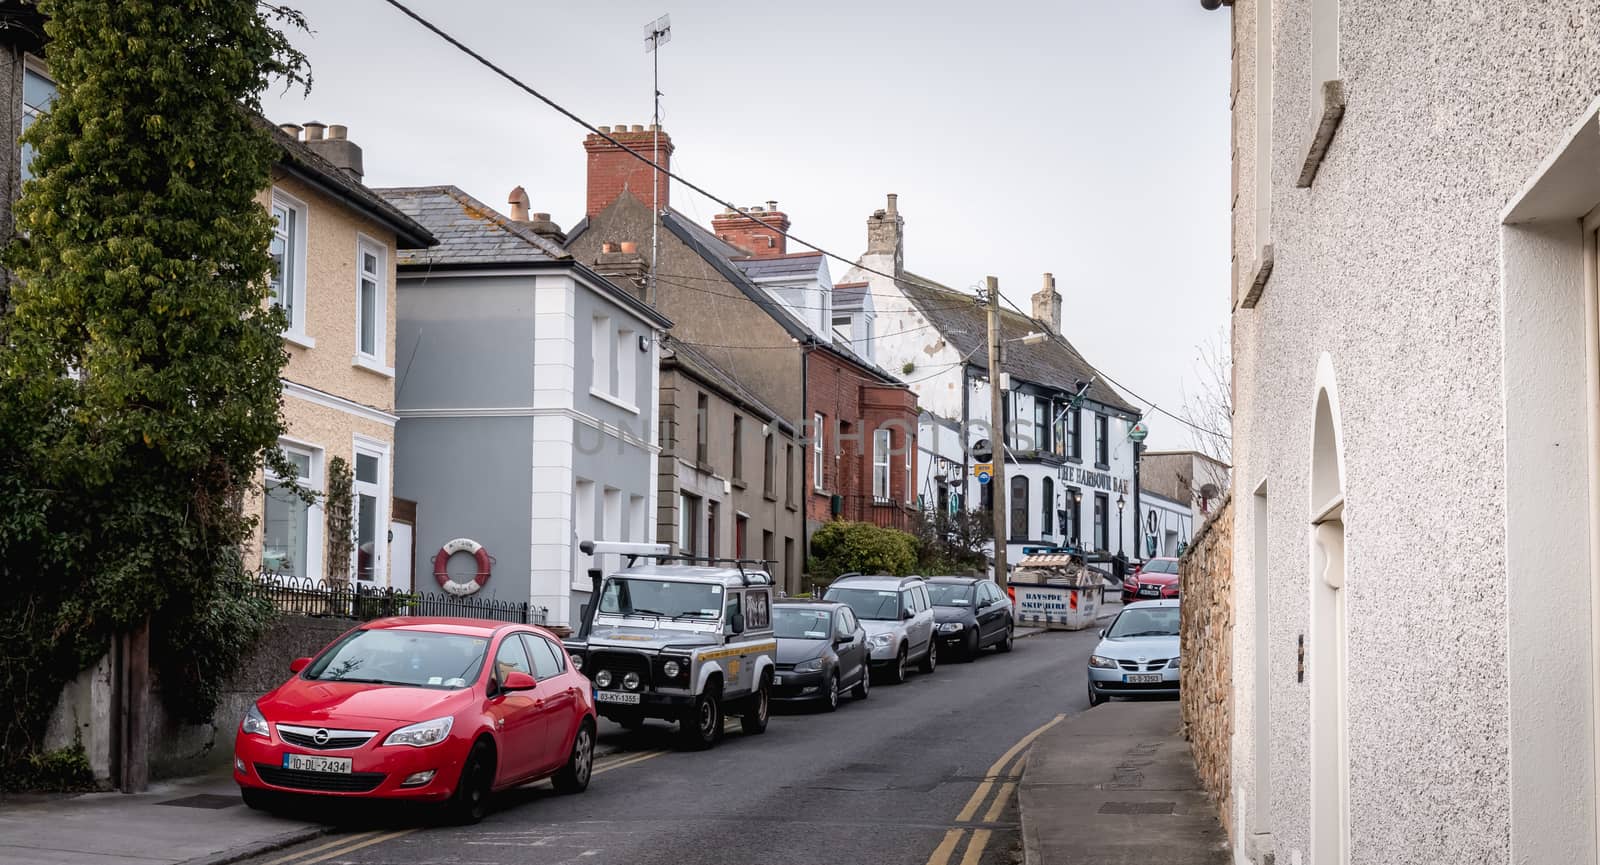 Typical architecture of town center houses of Howth, Ireland by AtlanticEUROSTOXX